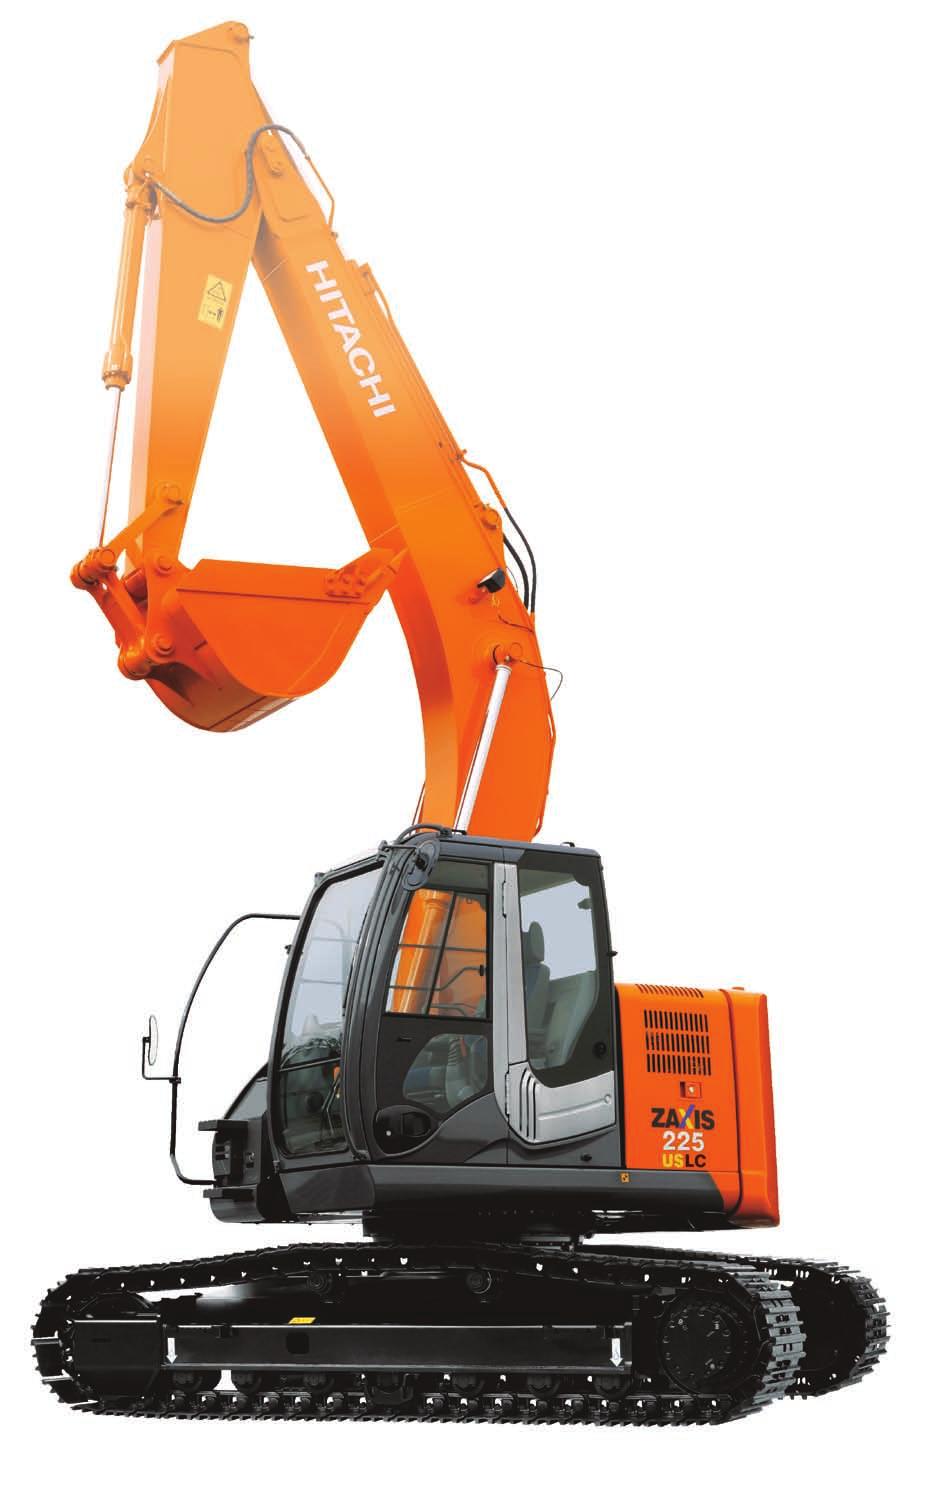 ZAXIS-3 series Short-tail-swing version HYDRAULIC EXCAVATOR Model Code: ZX225USLC-3 Engine Rated Power: 122 kw (164 HP)